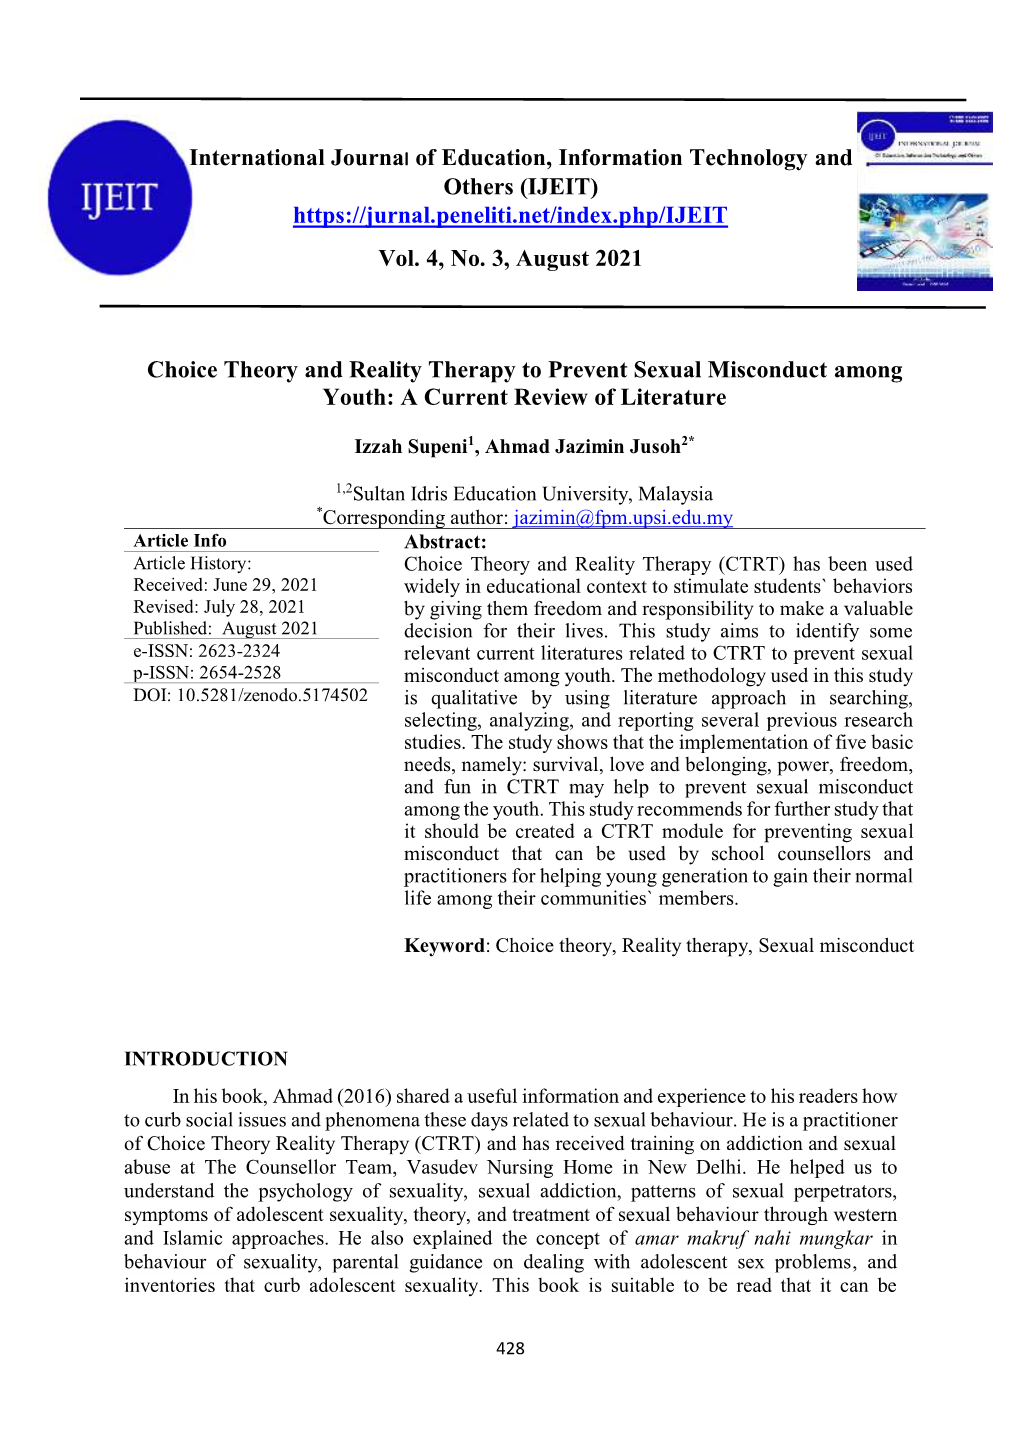 International Journal of Education, Information Technology and Others (IJEIT) Vol